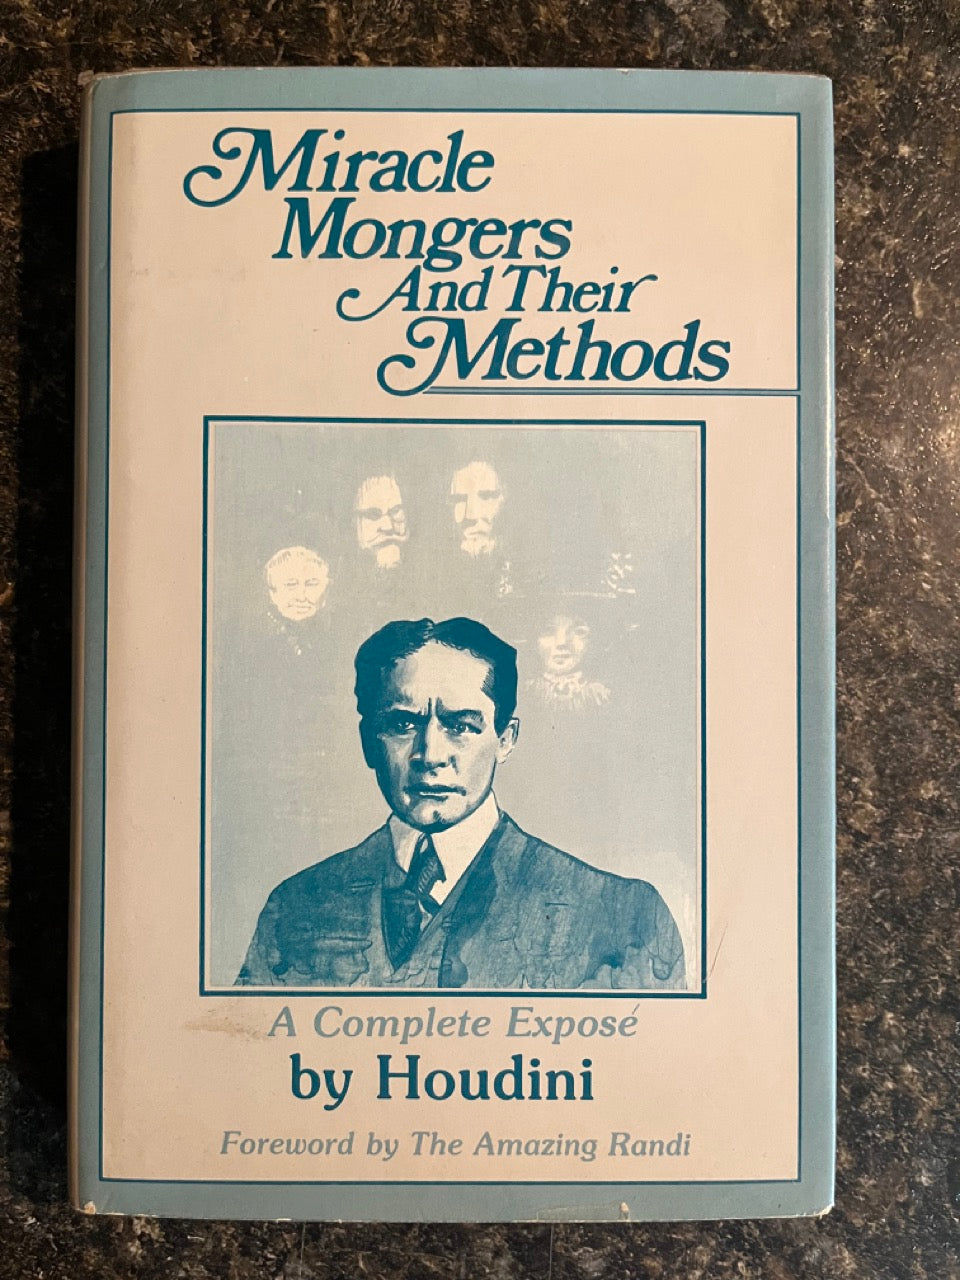 Miracle Mongers And Their Methods - Harry Houdini